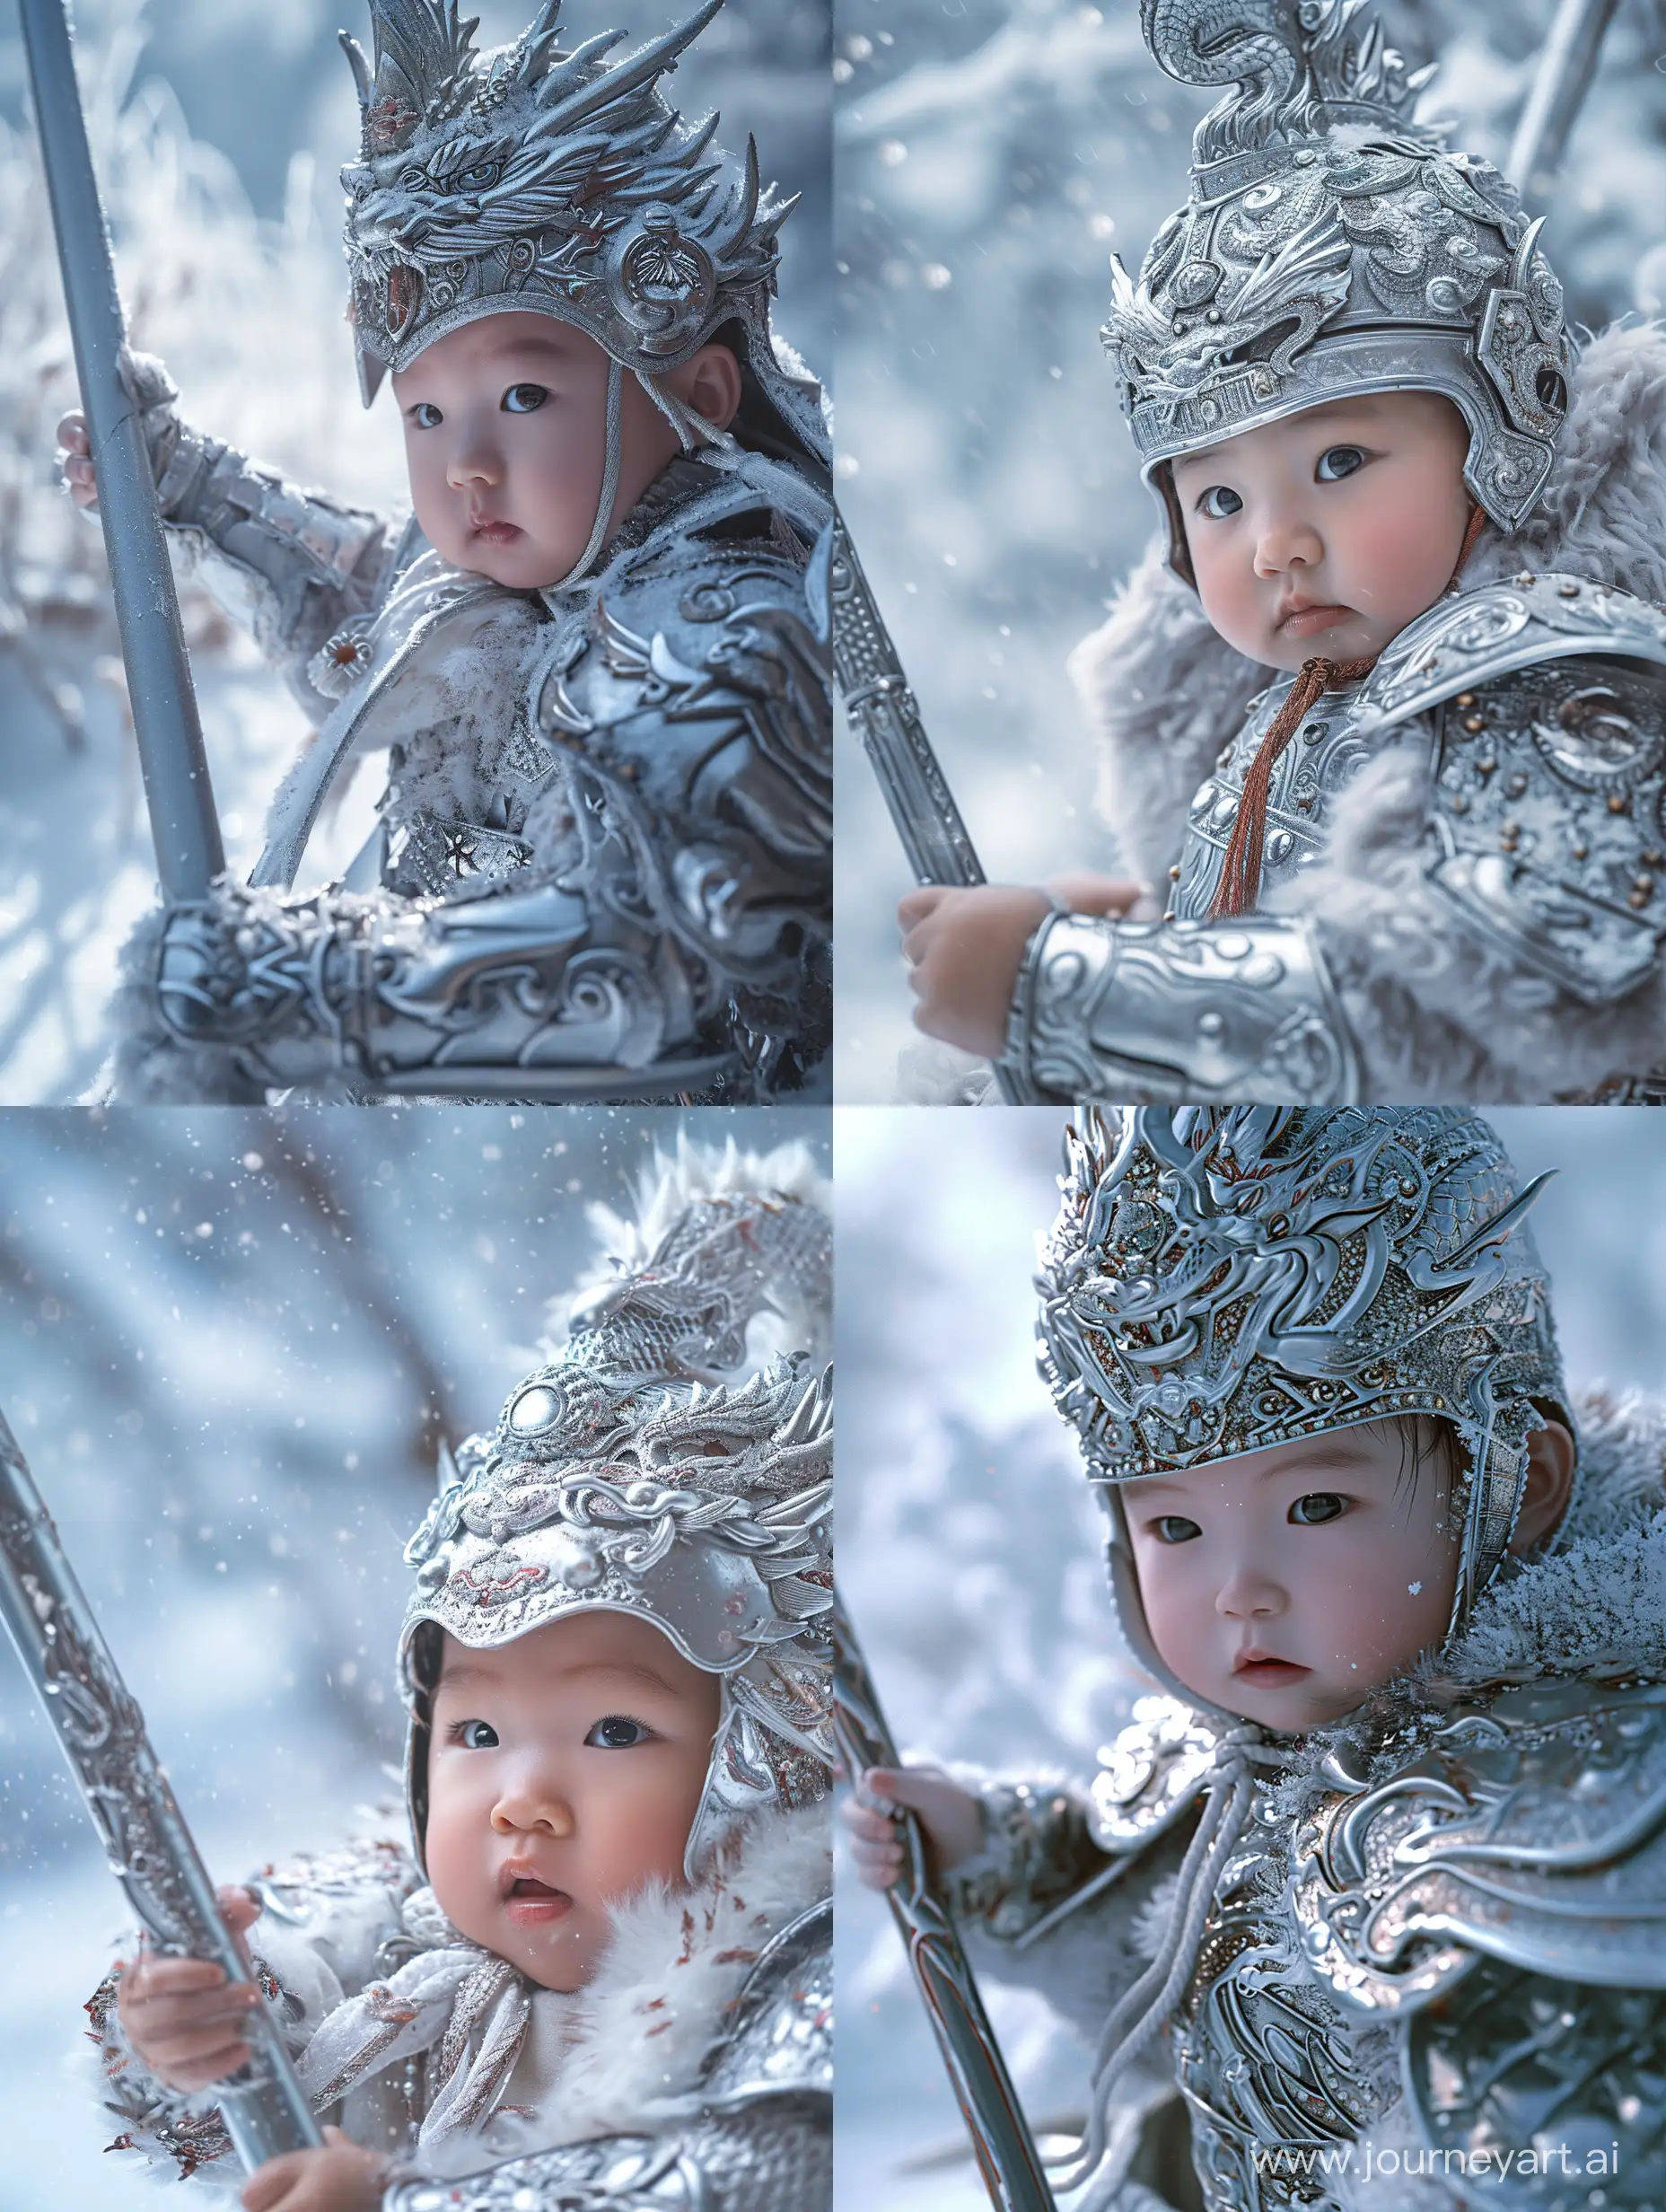 A beautiful 1-year-old baby wearing General Zhao Zilong's silver armor, adorned with a dragon-patterned helmet, holds a long spear. The close-up shot captures the baby's face in the snowy scenery, enhancing the image with 8K HDR best quality.